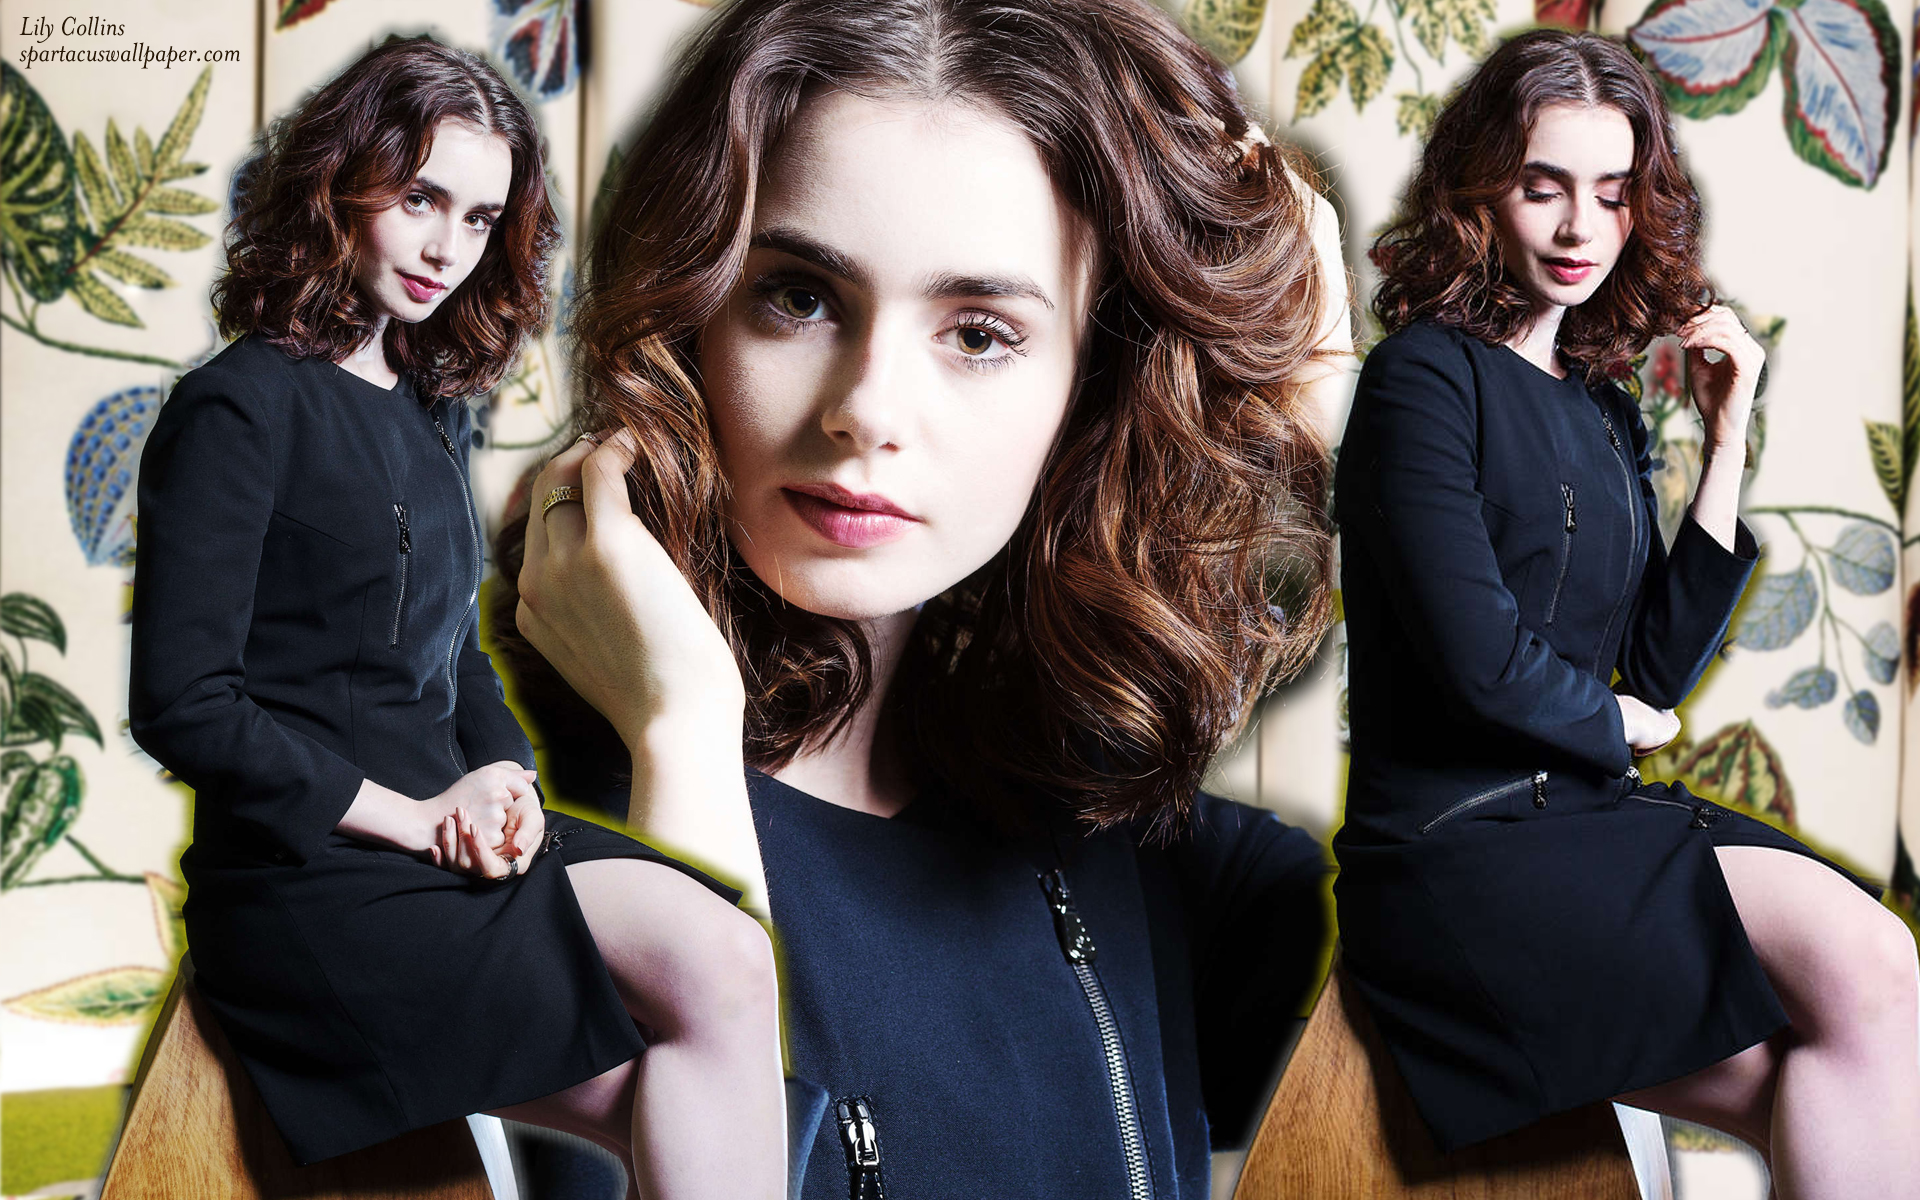 Lily Collins II. 